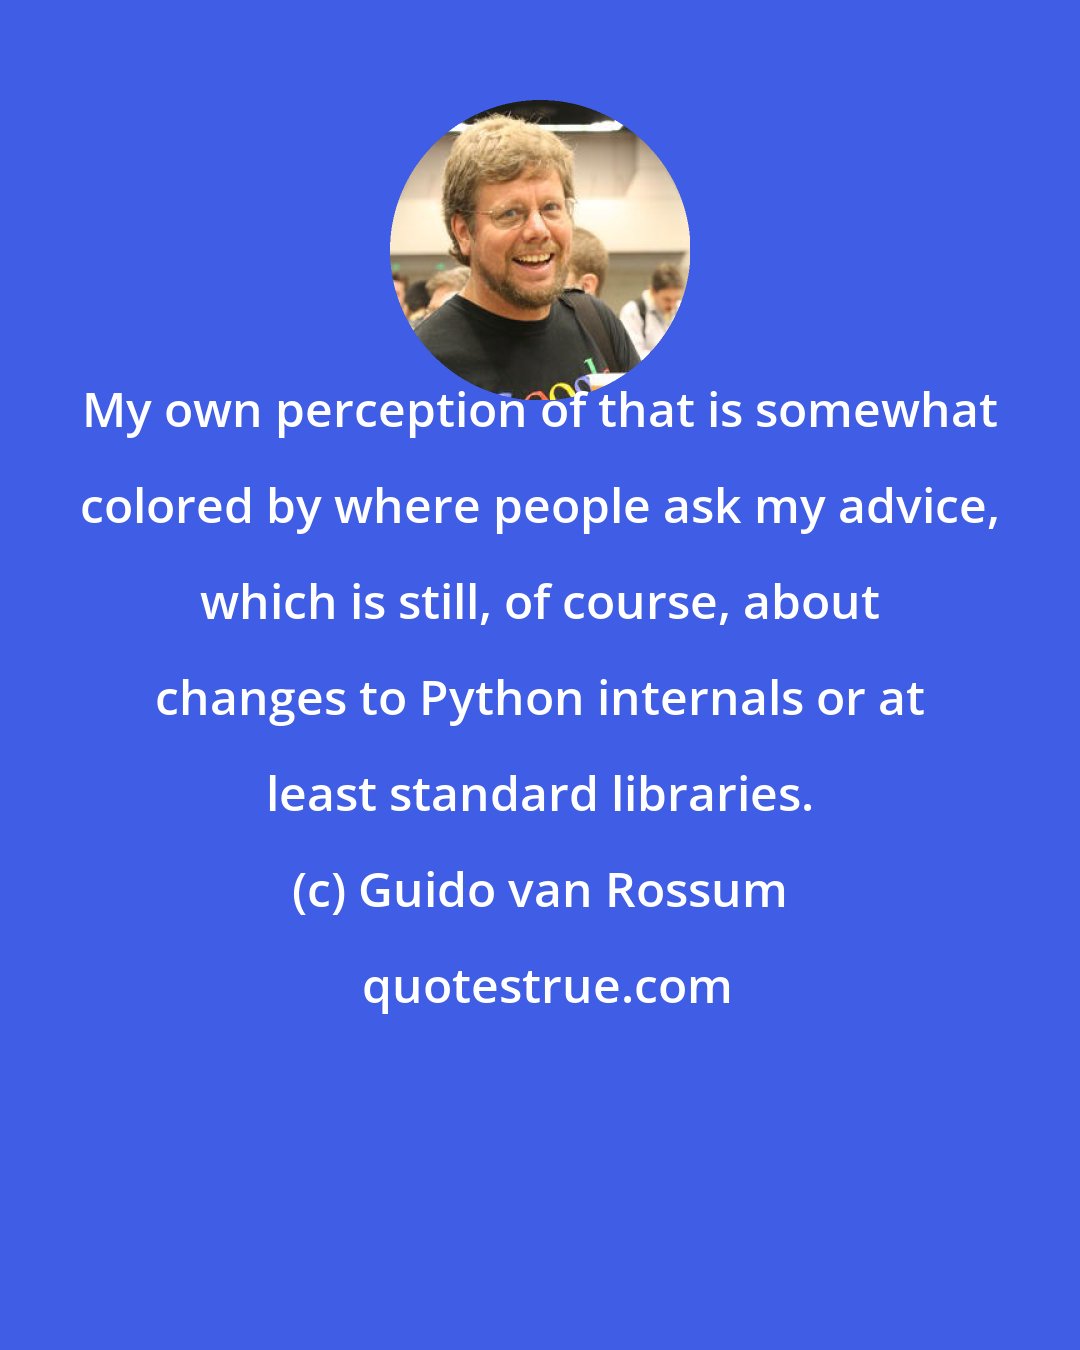 Guido van Rossum: My own perception of that is somewhat colored by where people ask my advice, which is still, of course, about changes to Python internals or at least standard libraries.